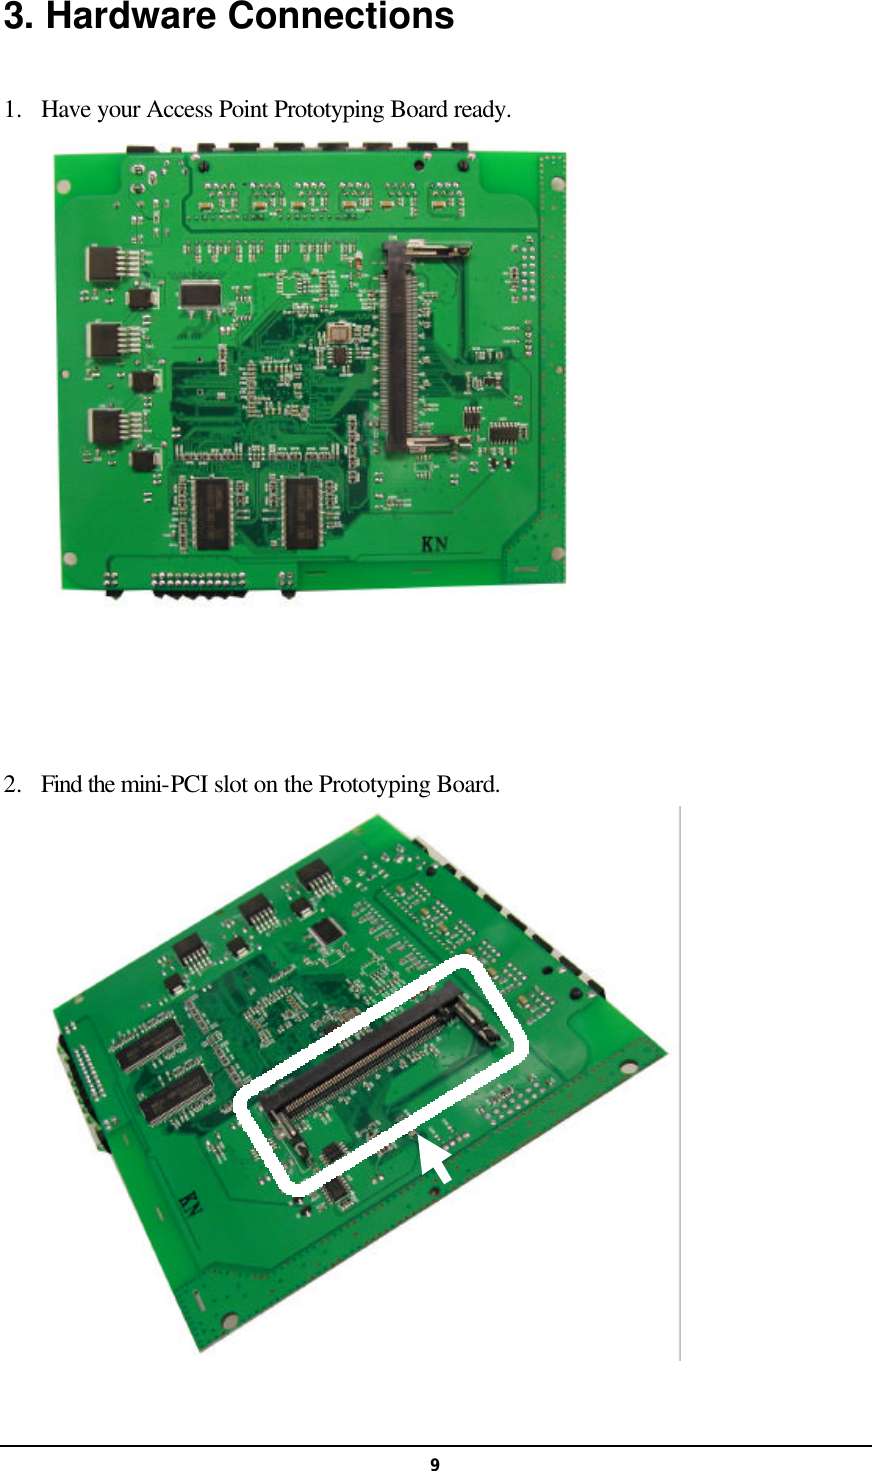  93. Hardware Connections  1.  Have your Access Point Prototyping Board ready.      2.  Find the mini-PCI slot on the Prototyping Board.   